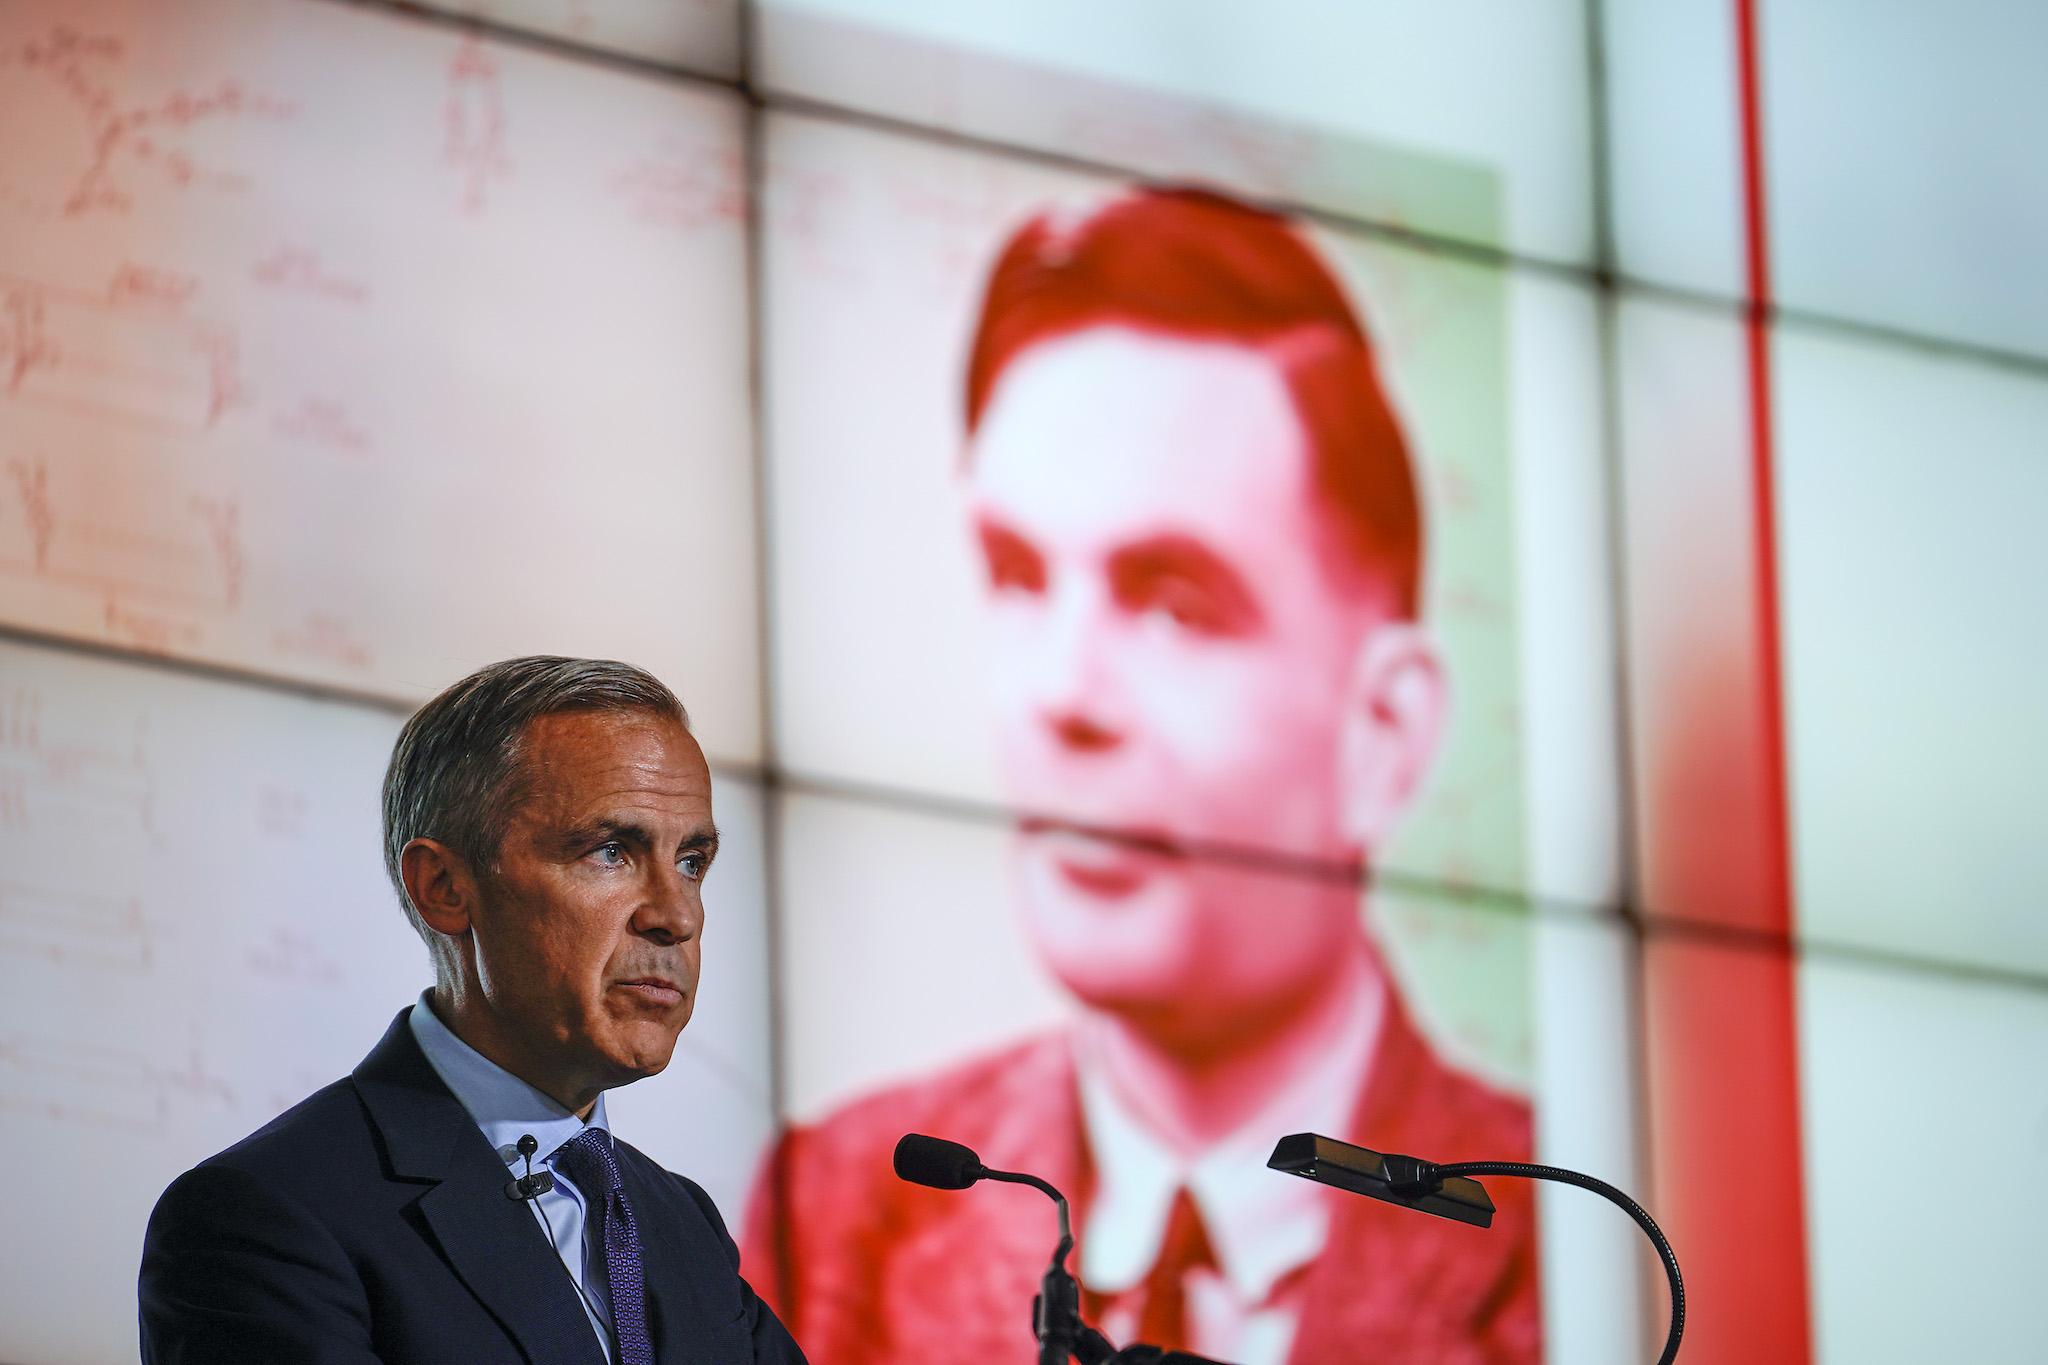 Alan Turing The Secret Code Hidden On The New £50 Note The Independent The Independent